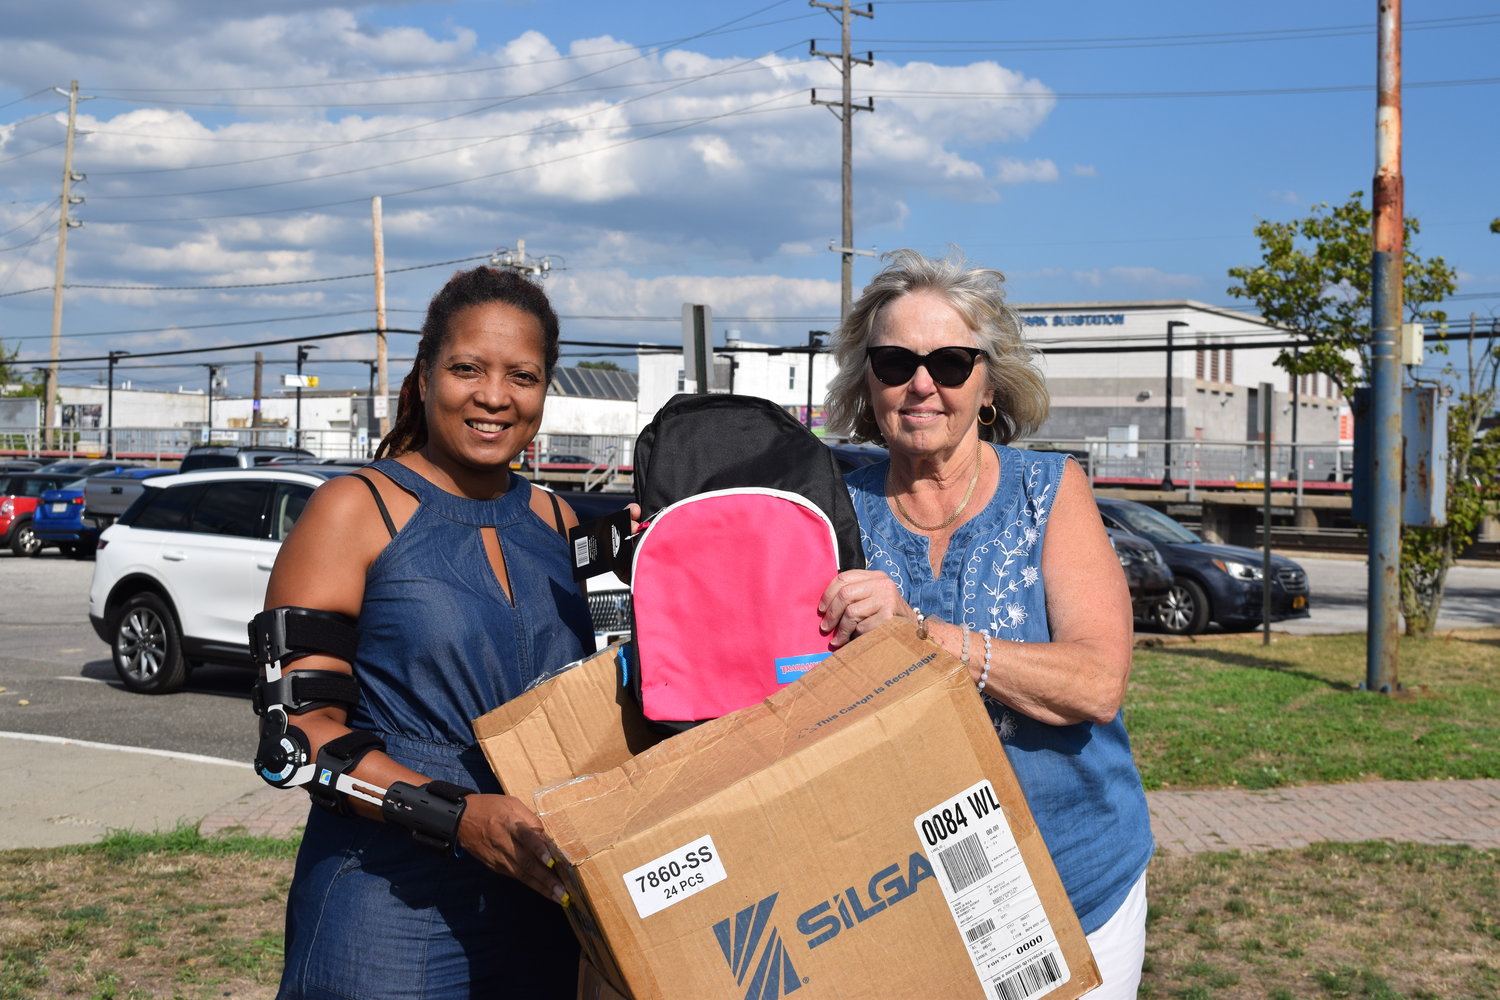 Janice Gause received a backpack stuffed with school supplies from Legislator Denise Ford.